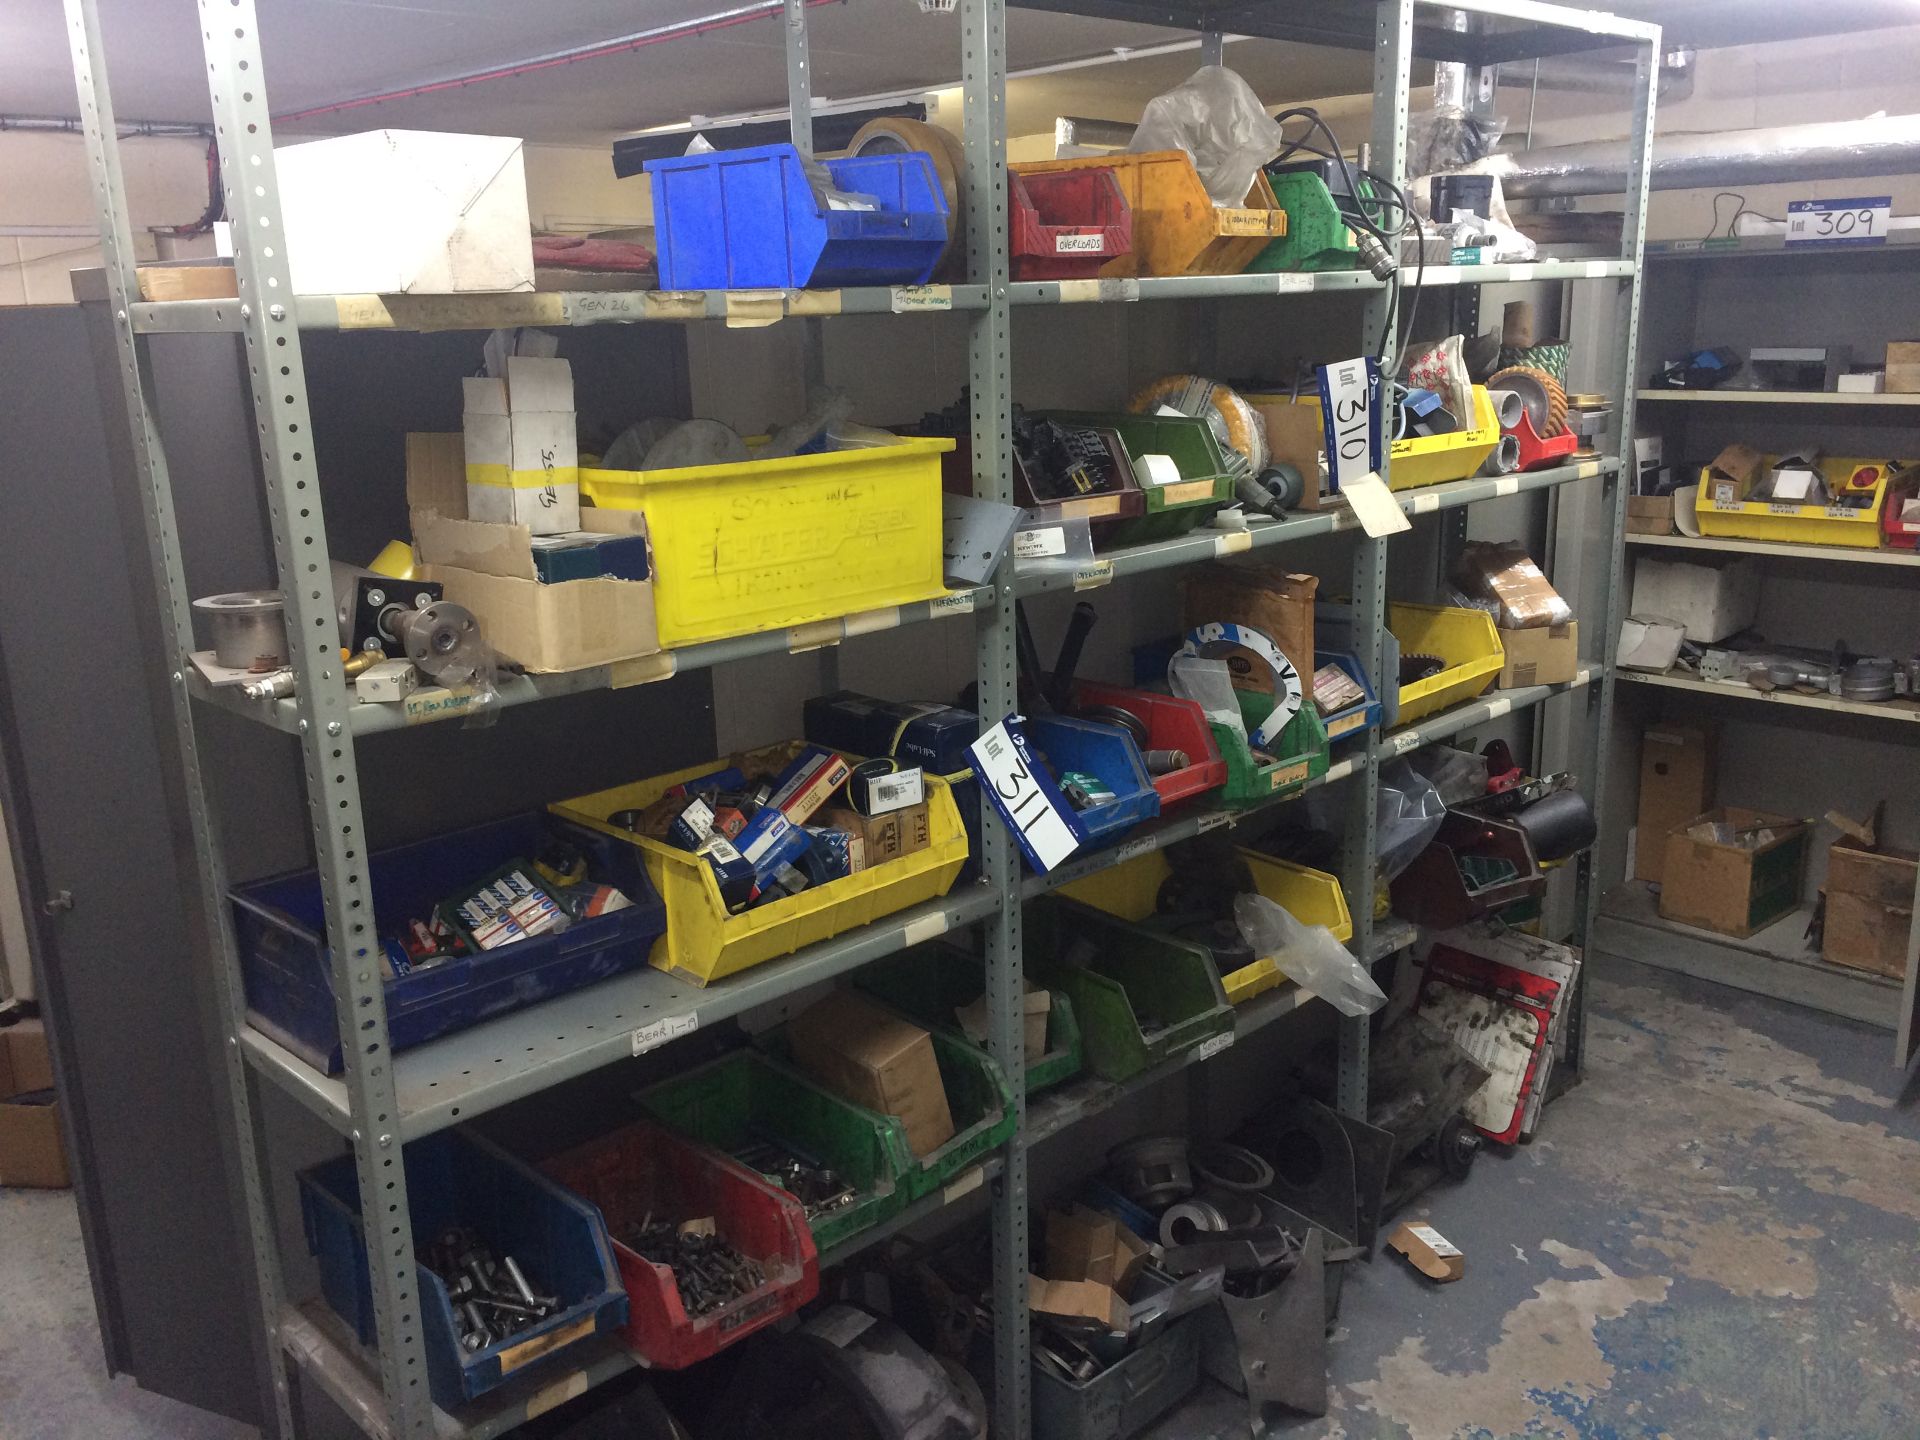 Contents to Three Bays of Shelving including Chain / Cogs / Bearings / Contactors, etc